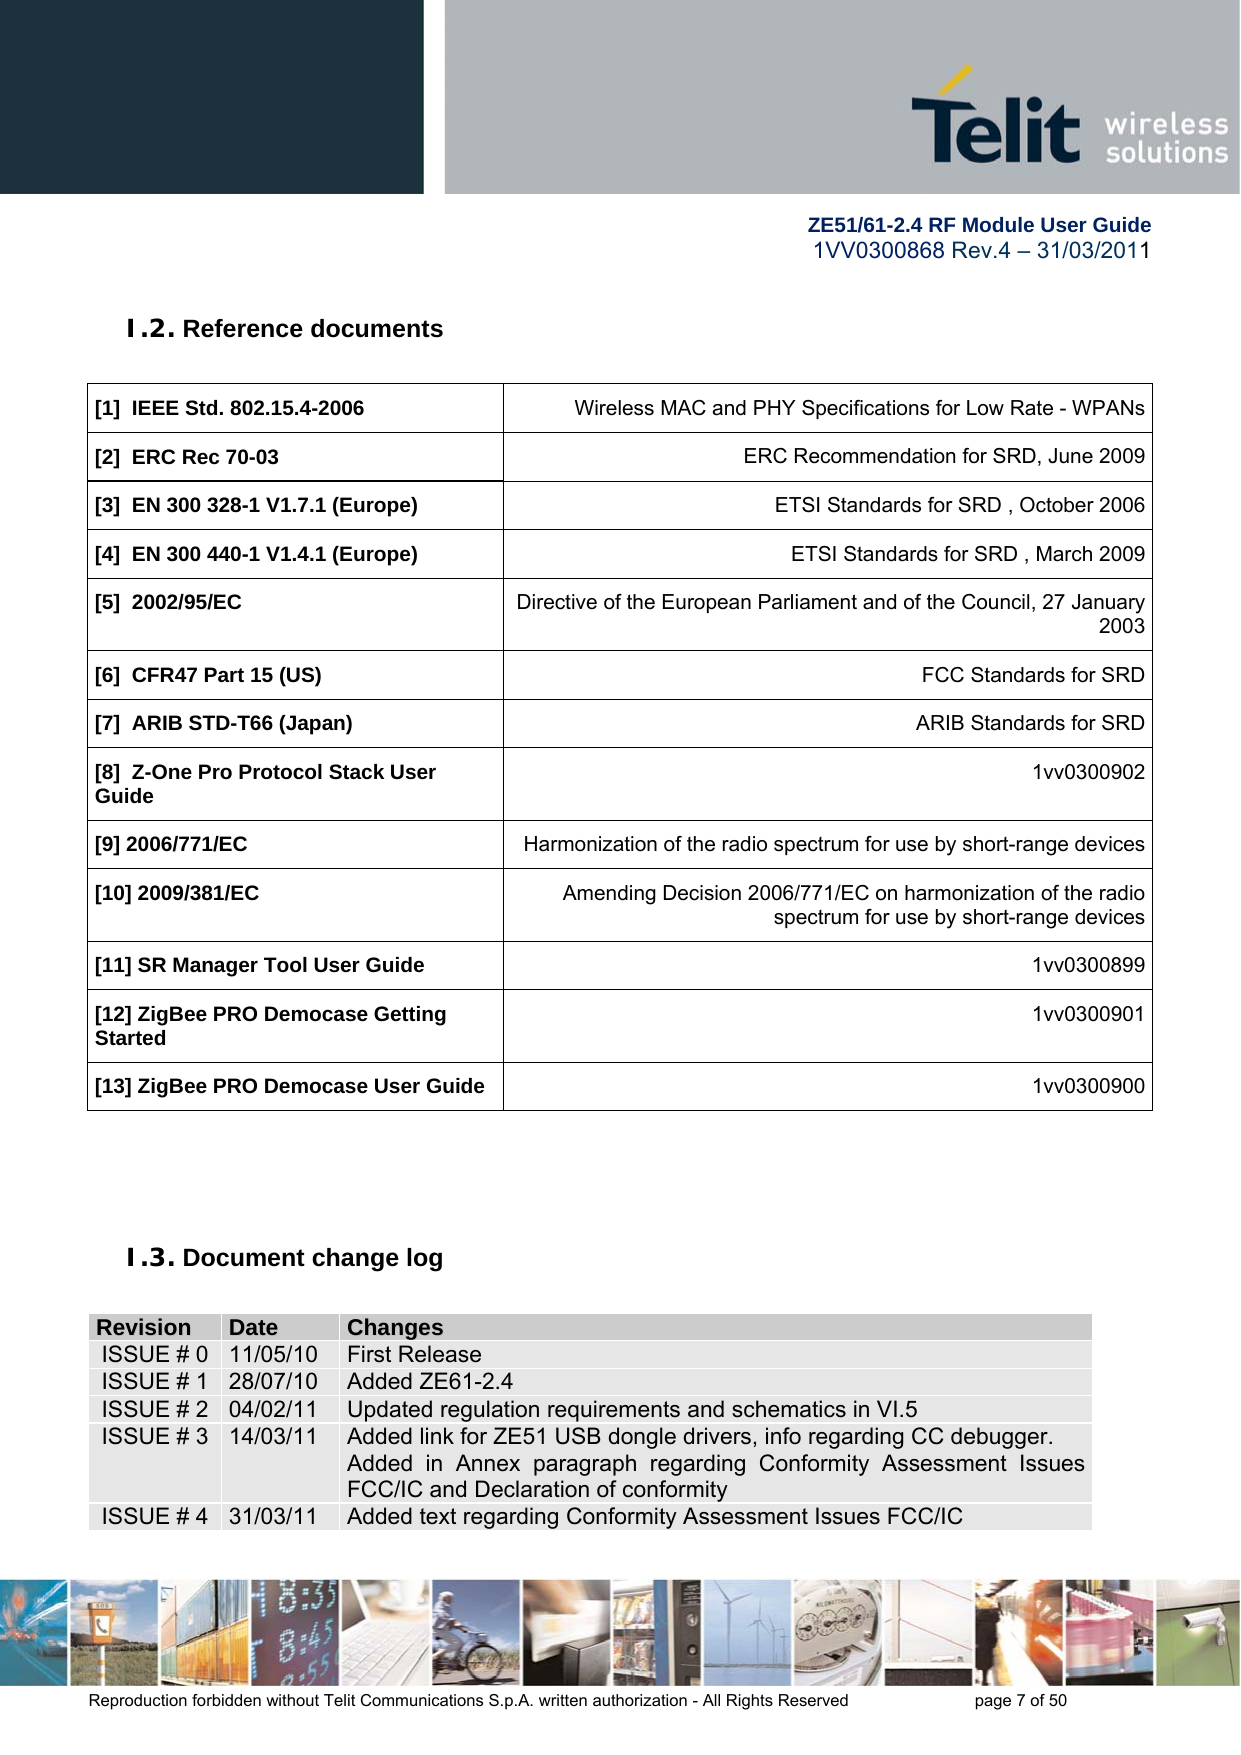        ZE51/61-2.4 RF Module User Guide 1VV0300868 Rev.4 – 31/03/2011 Reproduction forbidden without Telit Communications S.p.A. written authorization - All Rights Reserved    page 7 of 50  I.2. Reference documents  [1]  IEEE Std. 802.15.4-2006  Wireless MAC and PHY Specifications for Low Rate - WPANs[2]  ERC Rec 70-03 ERC Recommendation for SRD, June 2009[3]  EN 300 328-1 V1.7.1 (Europe) ETSI Standards for SRD , October 2006[4]  EN 300 440-1 V1.4.1 (Europe) ETSI Standards for SRD , March 2009[5]  2002/95/EC Directive of the European Parliament and of the Council, 27 January 2003[6]  CFR47 Part 15 (US) FCC Standards for SRD[7]  ARIB STD-T66 (Japan) ARIB Standards for SRD[8]  Z-One Pro Protocol Stack User Guide 1vv0300902[9] 2006/771/EC  Harmonization of the radio spectrum for use by short-range devices[10] 2009/381/EC  Amending Decision 2006/771/EC on harmonization of the radio spectrum for use by short-range devices[11] SR Manager Tool User Guide 1vv0300899 [12] ZigBee PRO Democase Getting Started  1vv0300901[13] ZigBee PRO Democase User Guide  1vv0300900    I.3. Document change log  RReevviissiioonn  DDaattee  CChhaannggeess  ISSUE # 0  11/05/10  First Release ISSUE # 1  28/07/10  Added ZE61-2.4 ISSUE # 2  04/02/11  Updated regulation requirements and schematics in VI.5 ISSUE # 3  14/03/11  Added link for ZE51 USB dongle drivers, info regarding CC debugger. Added in Annex paragraph regarding Conformity Assessment Issues FCC/IC and Declaration of conformity ISSUE # 4  31/03/11  Added text regarding Conformity Assessment Issues FCC/IC   